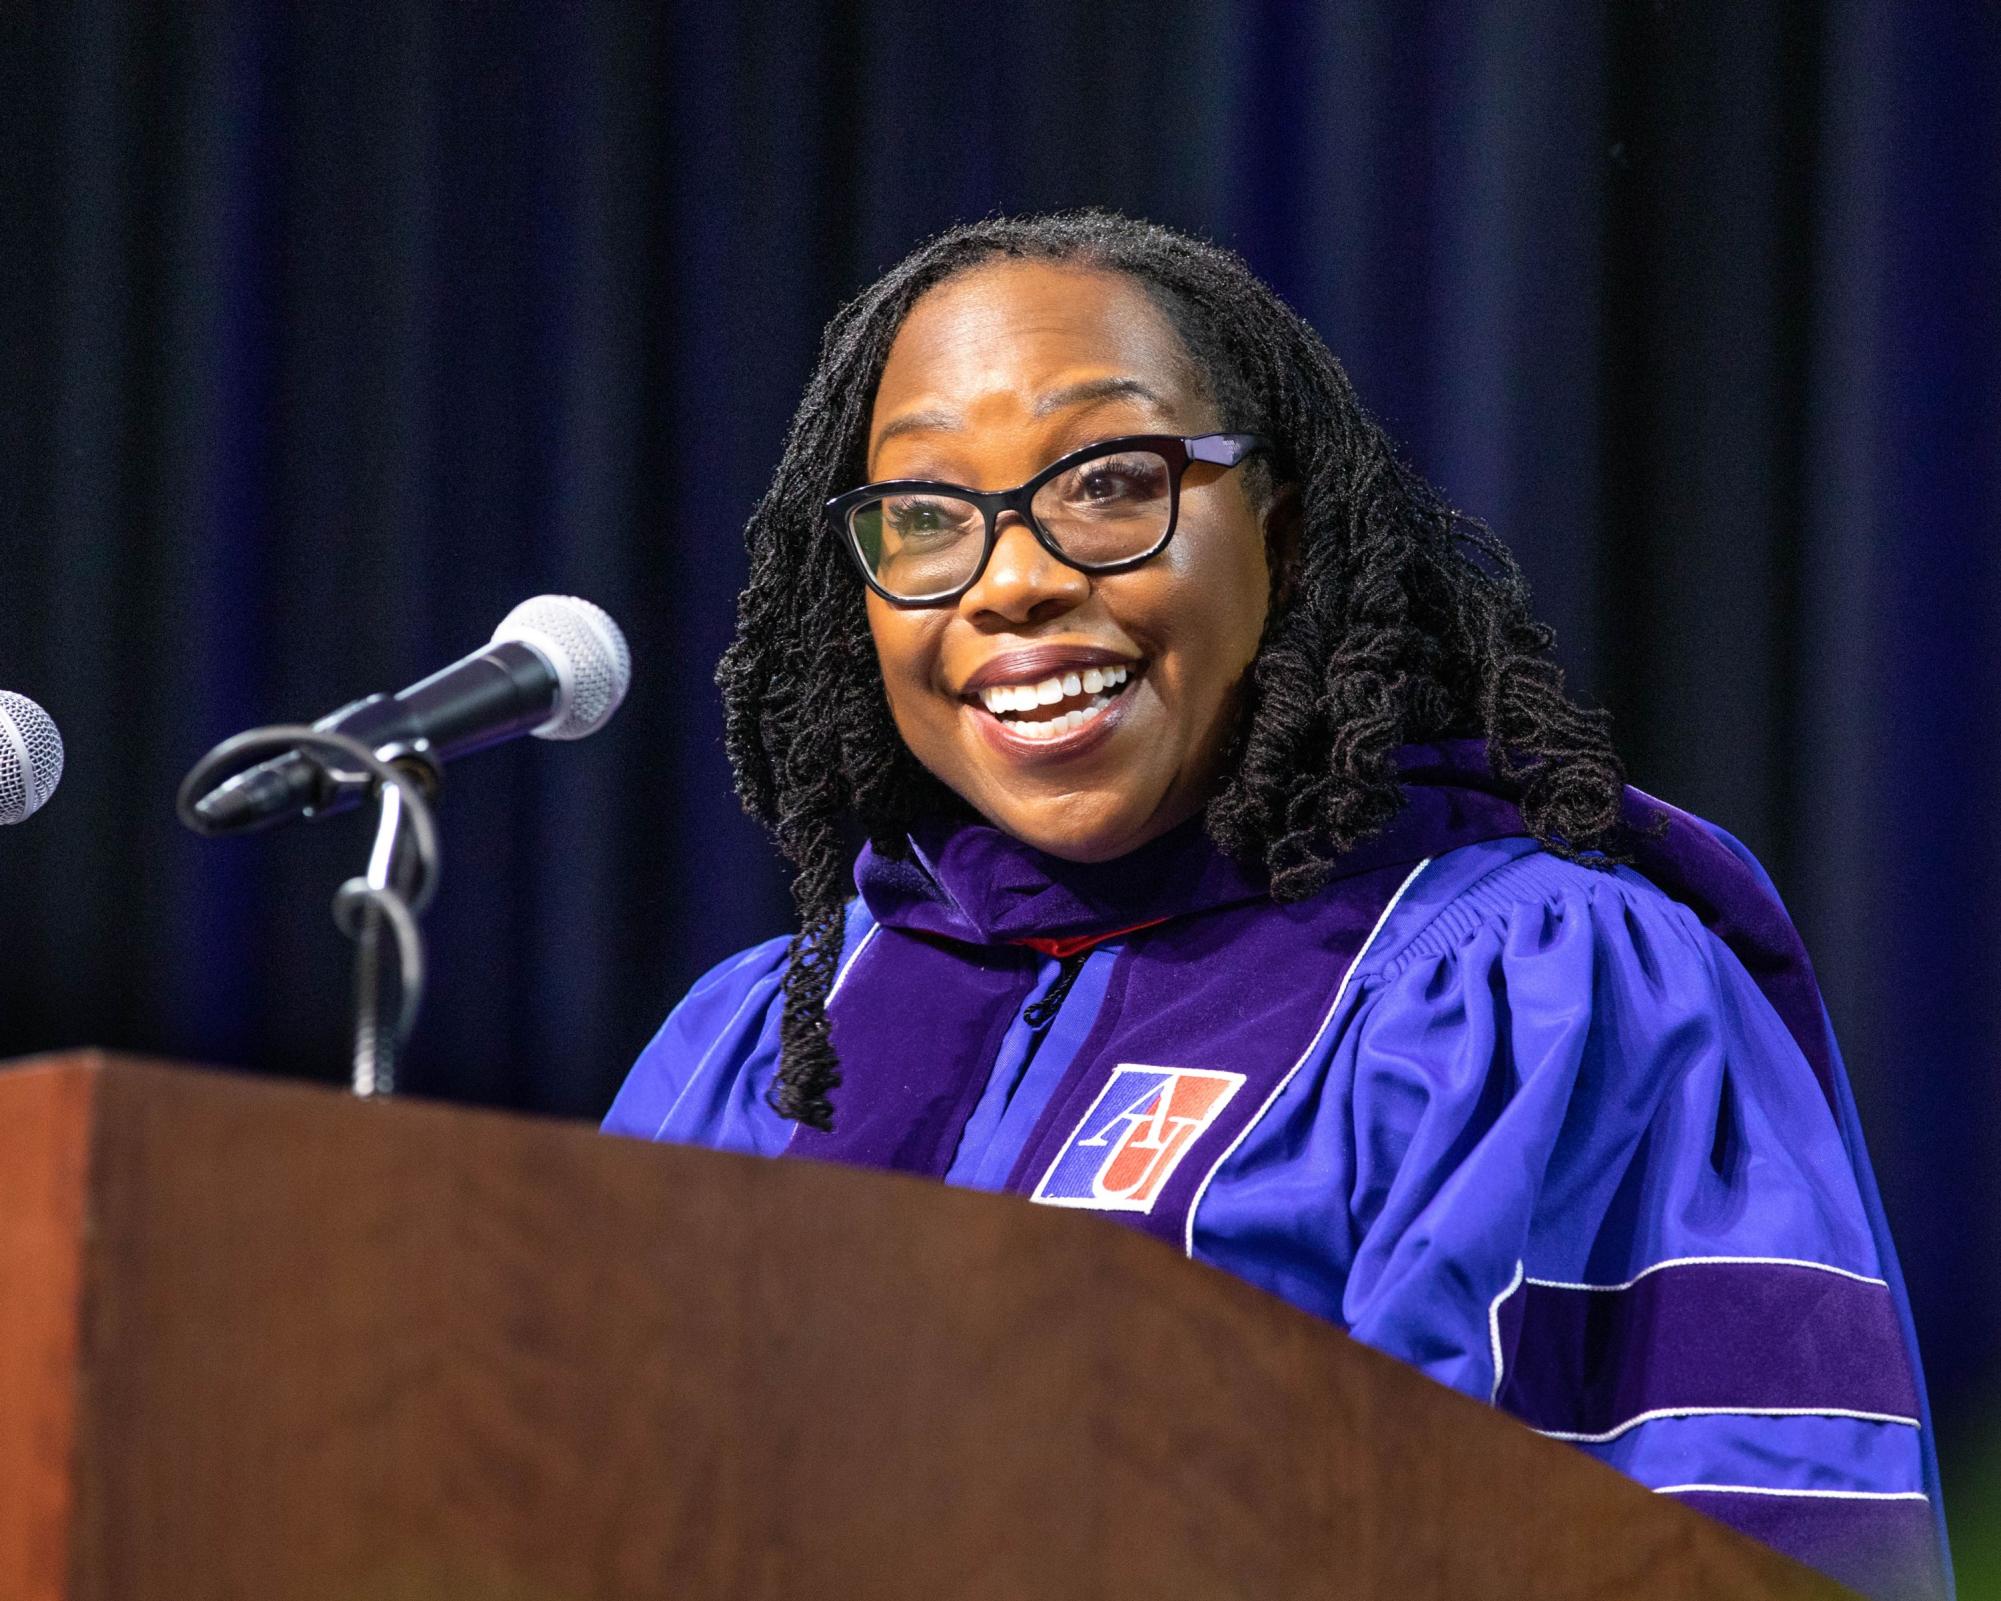 Justice Ketanji Brown Jackson giving an inaugural commencement speech for the Washington College of Law Class of 2023.